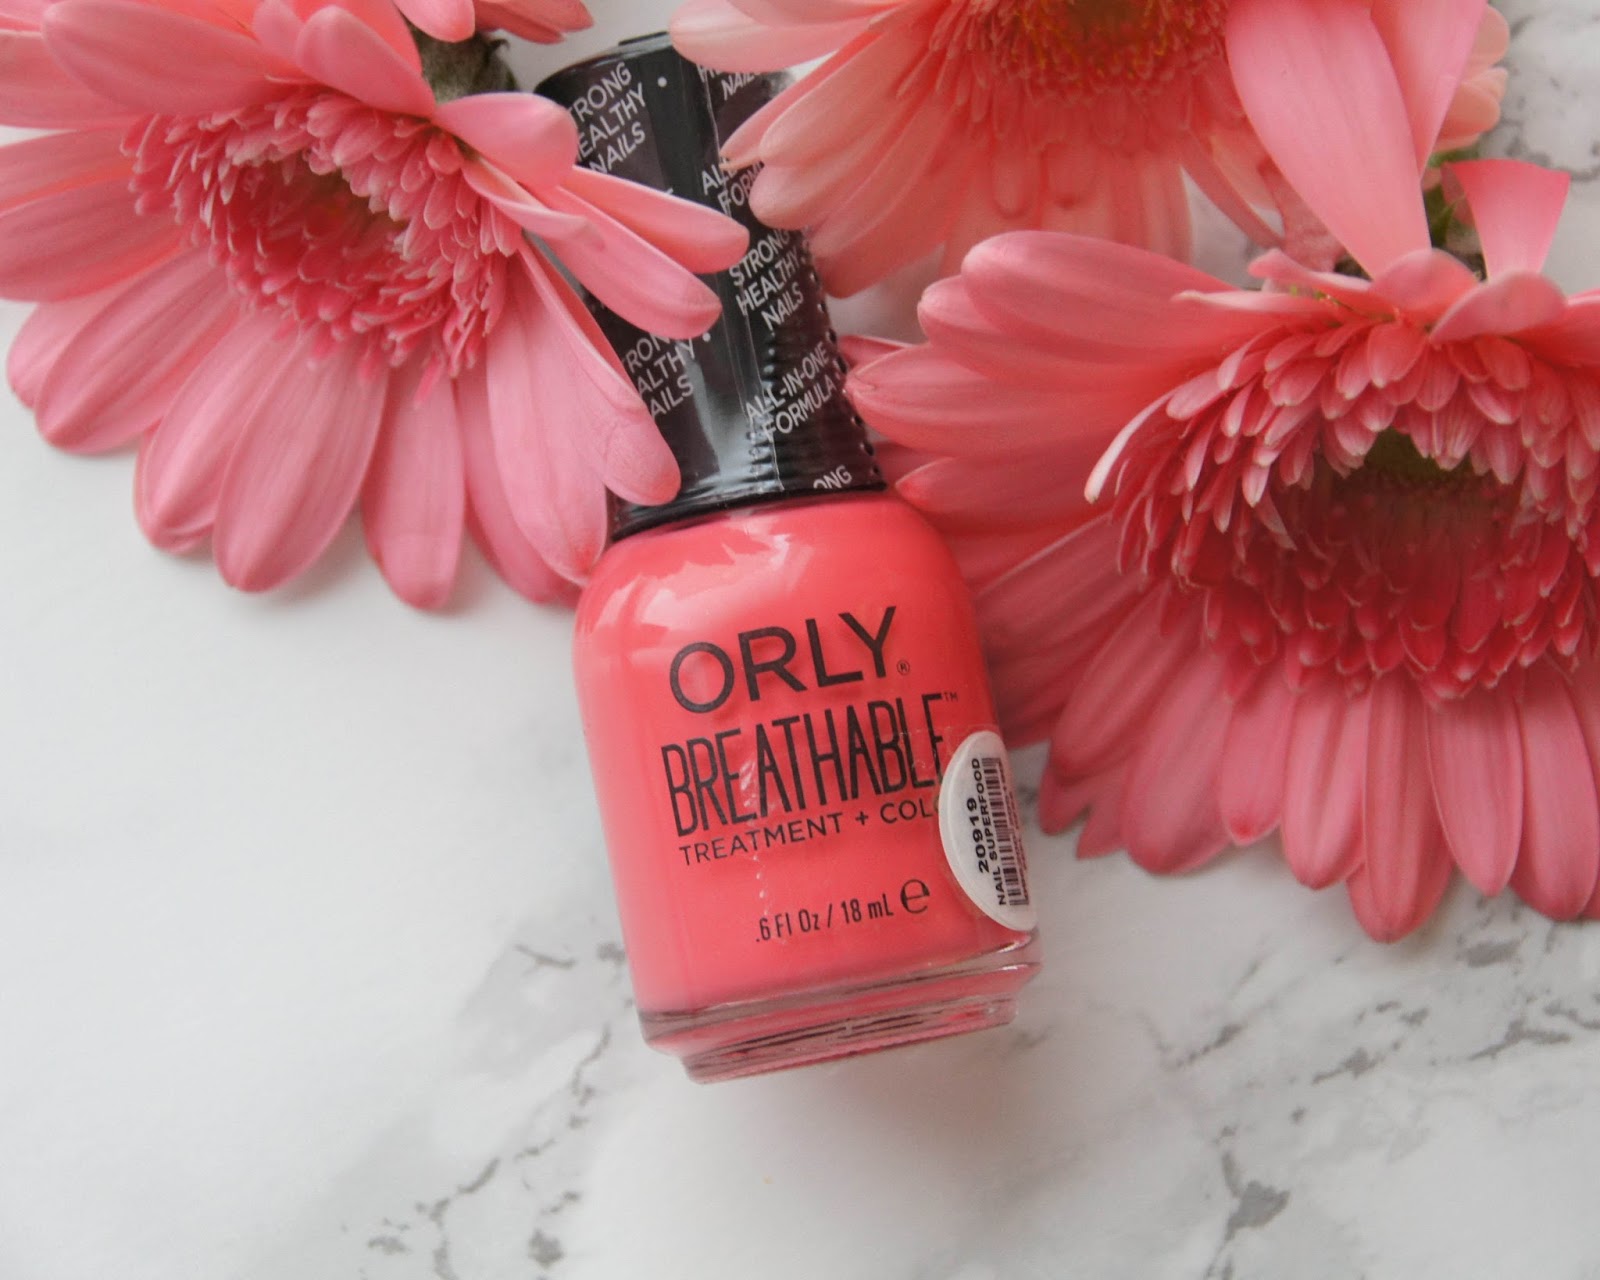 9. Orly Breathable Treatment + Color in "Nourishing Nude" - wide 3